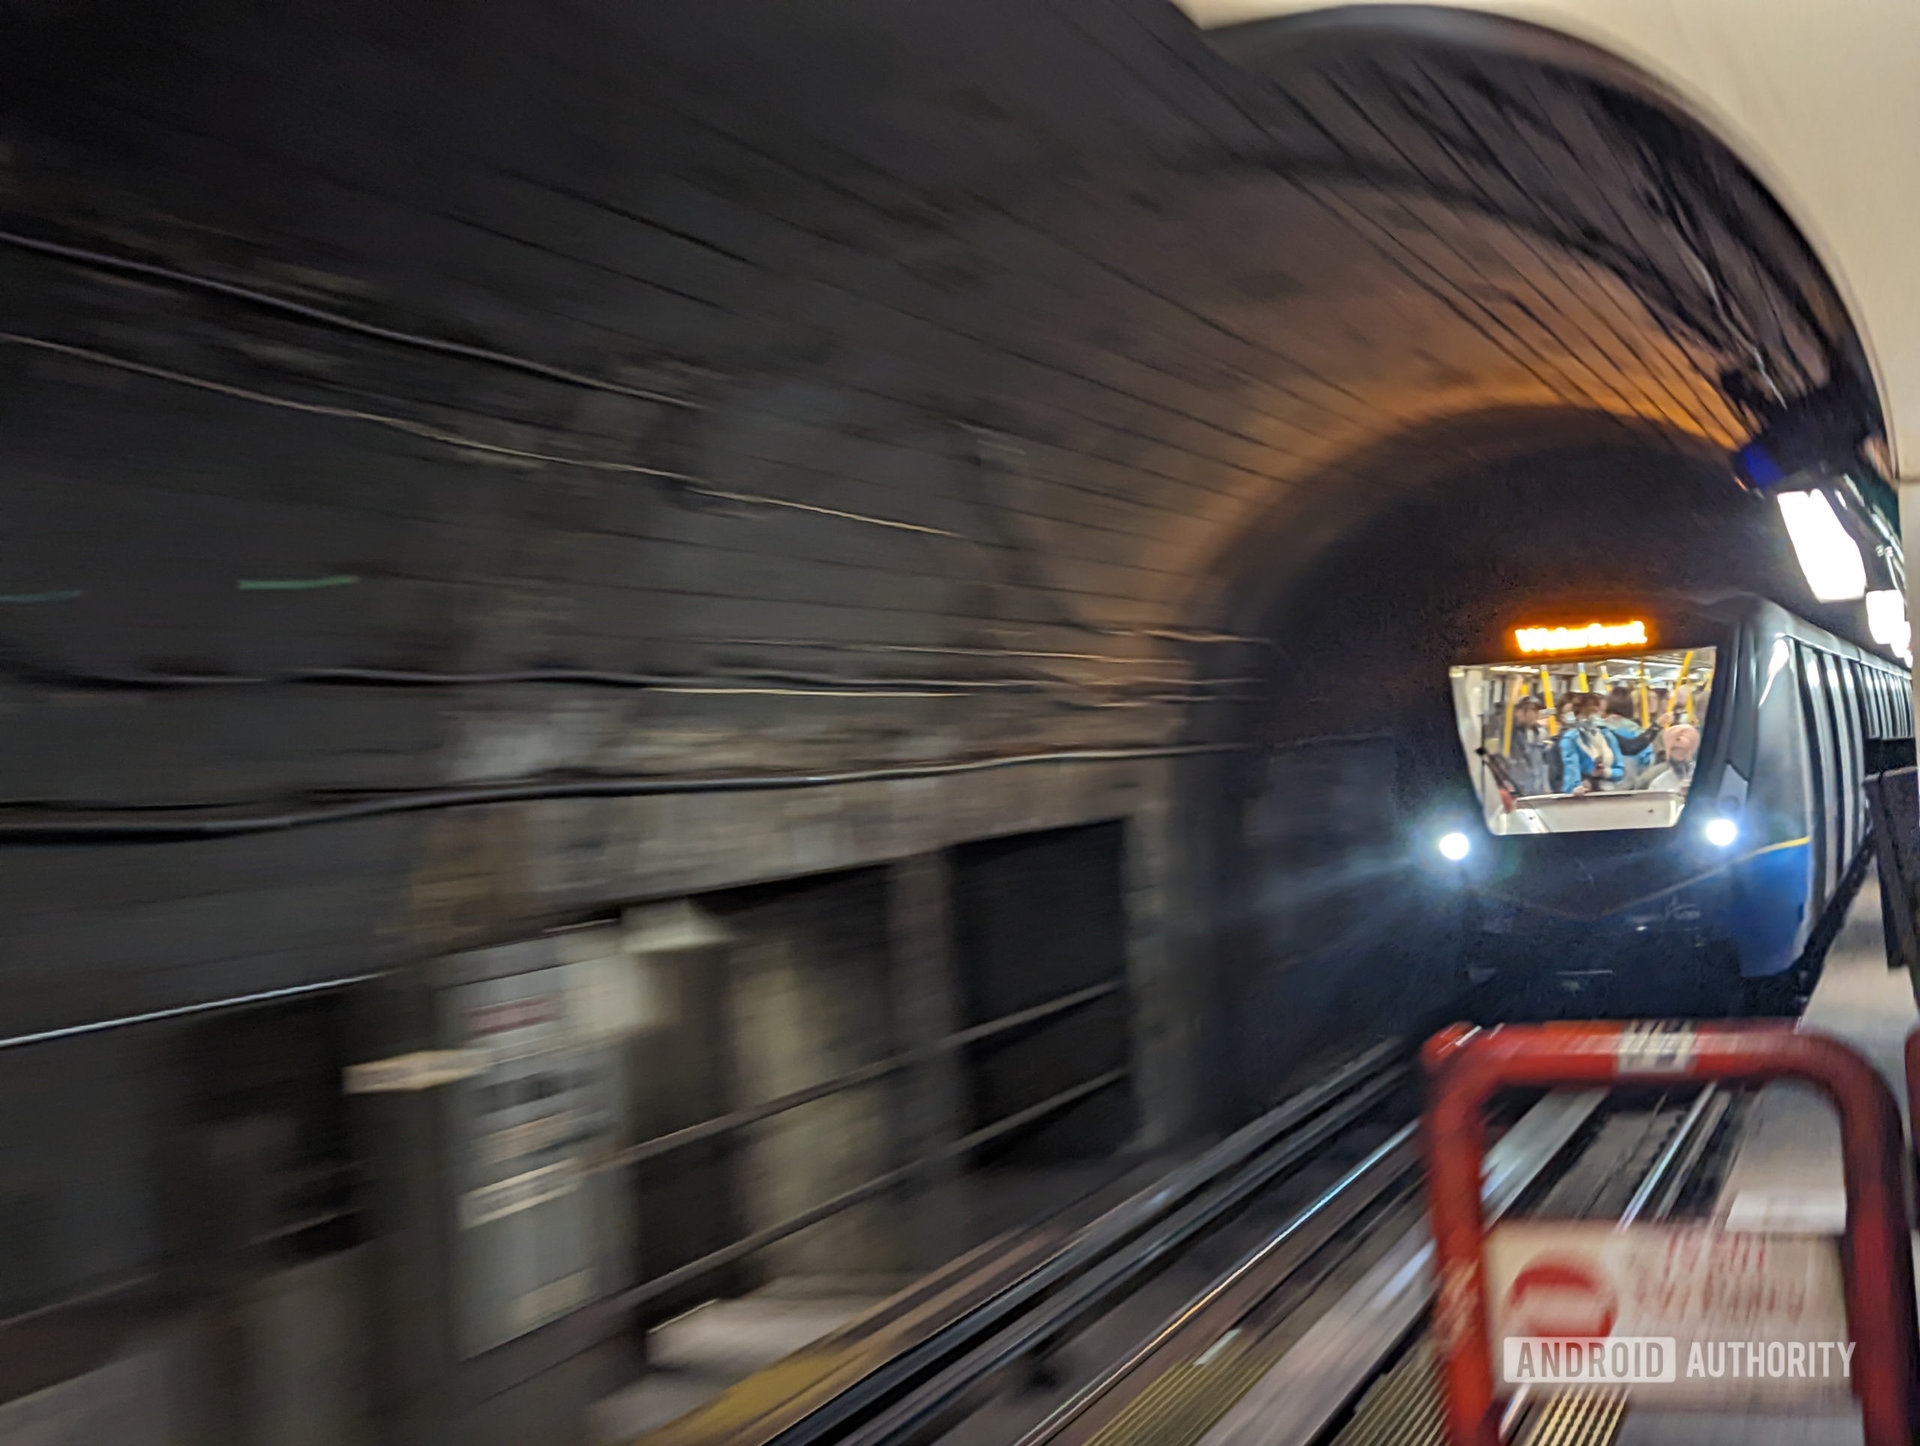 A photo taken of a subway train using a Google Pixel 6's Action Pan feature. The subway car is clear and sharp while the tunell has a motion blur-like effect added.